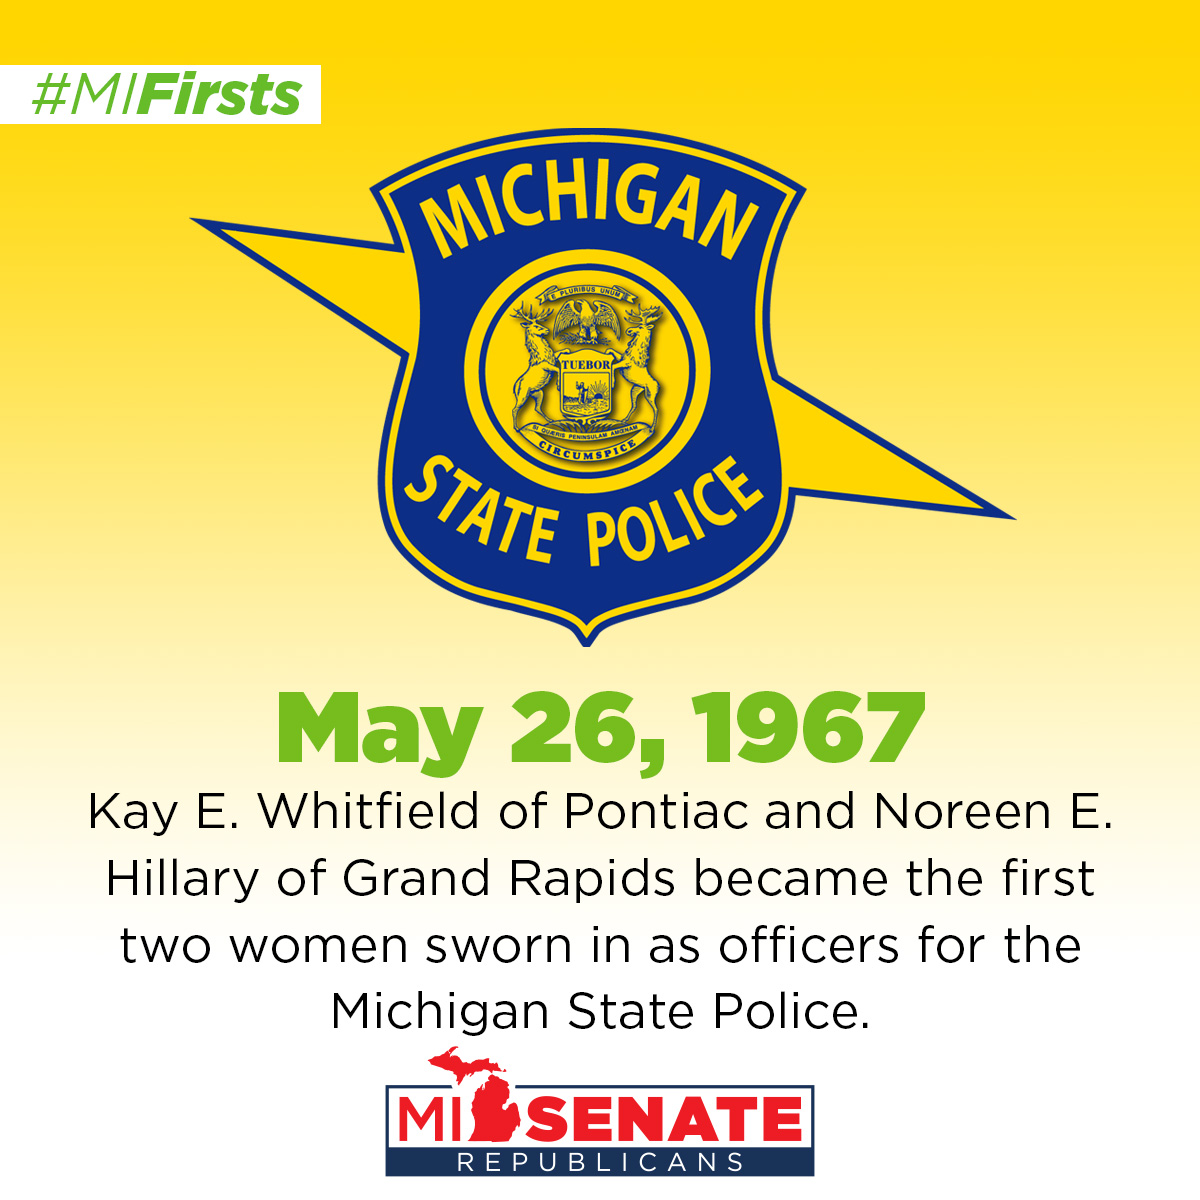 Kay E. Whitfield of Pontiac and Noreen E. Hillary of Grand Rapids became the first two women sworn in as officers in the Michigan State Police.